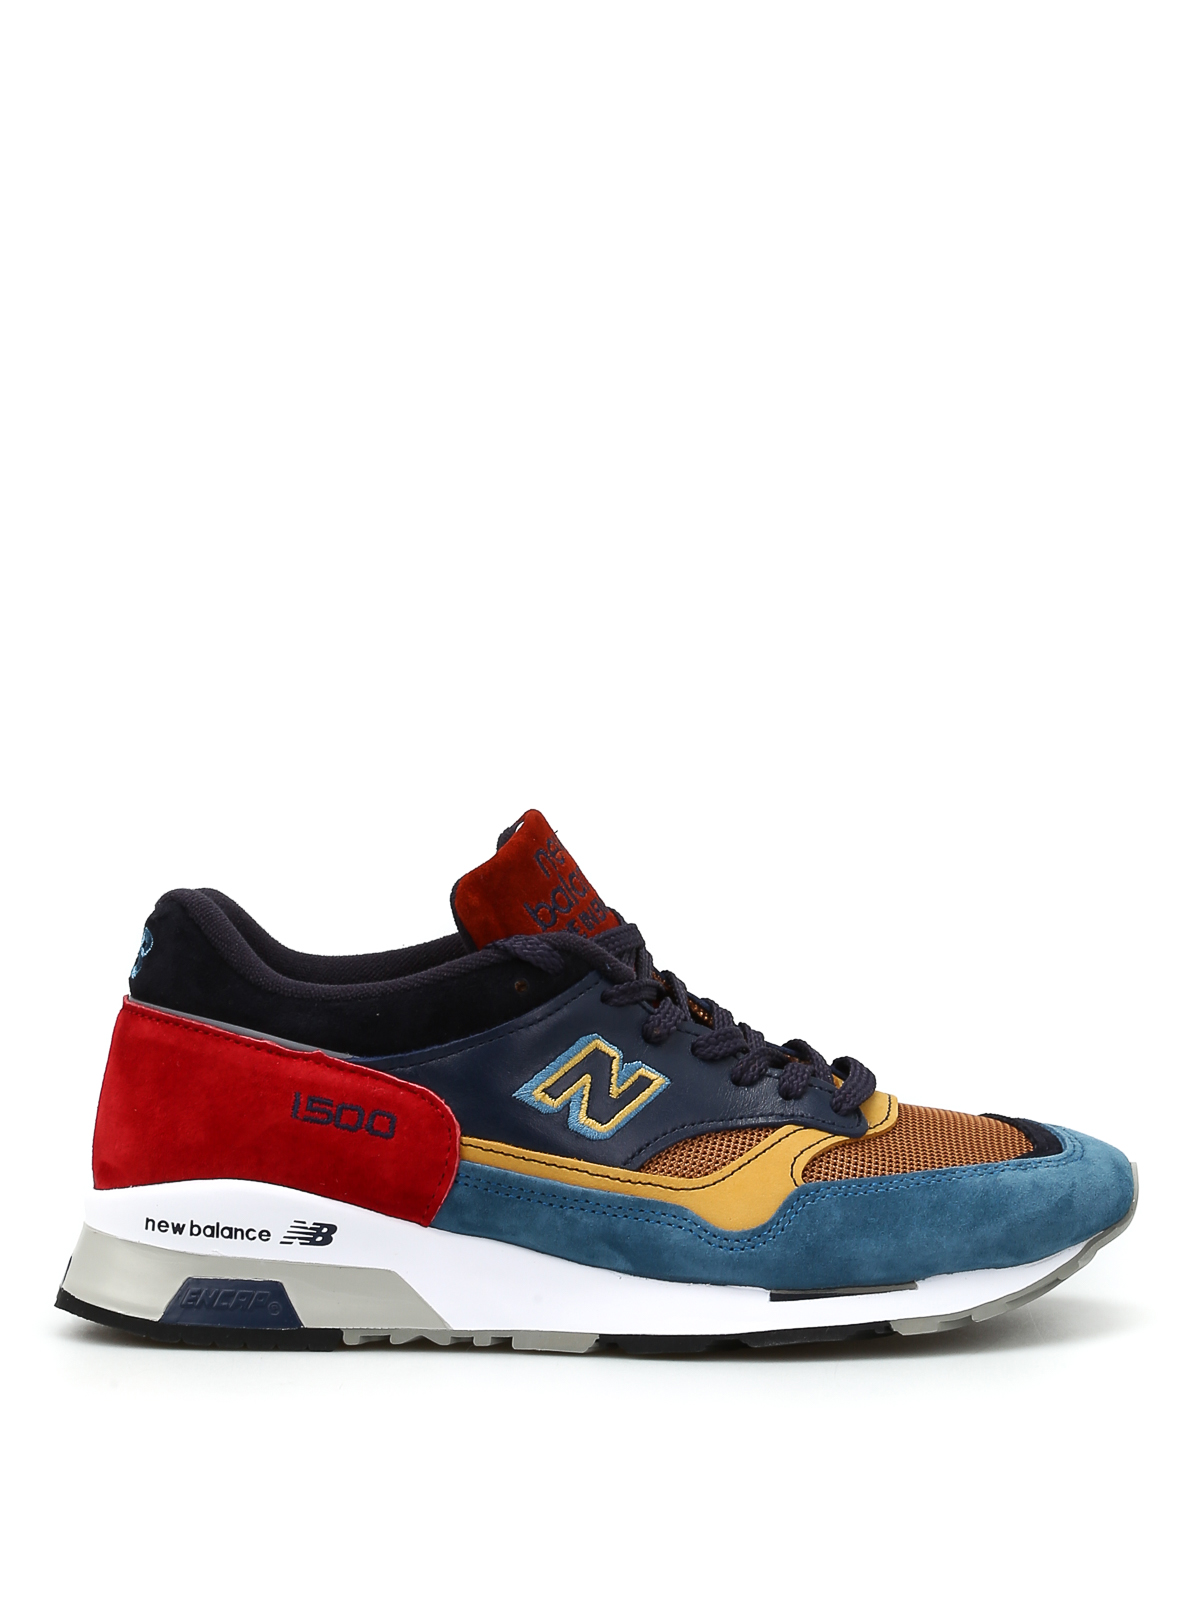 Trainers New Balance - 1500 suede and mesh sneakers - M1500YP | iKRIX.com